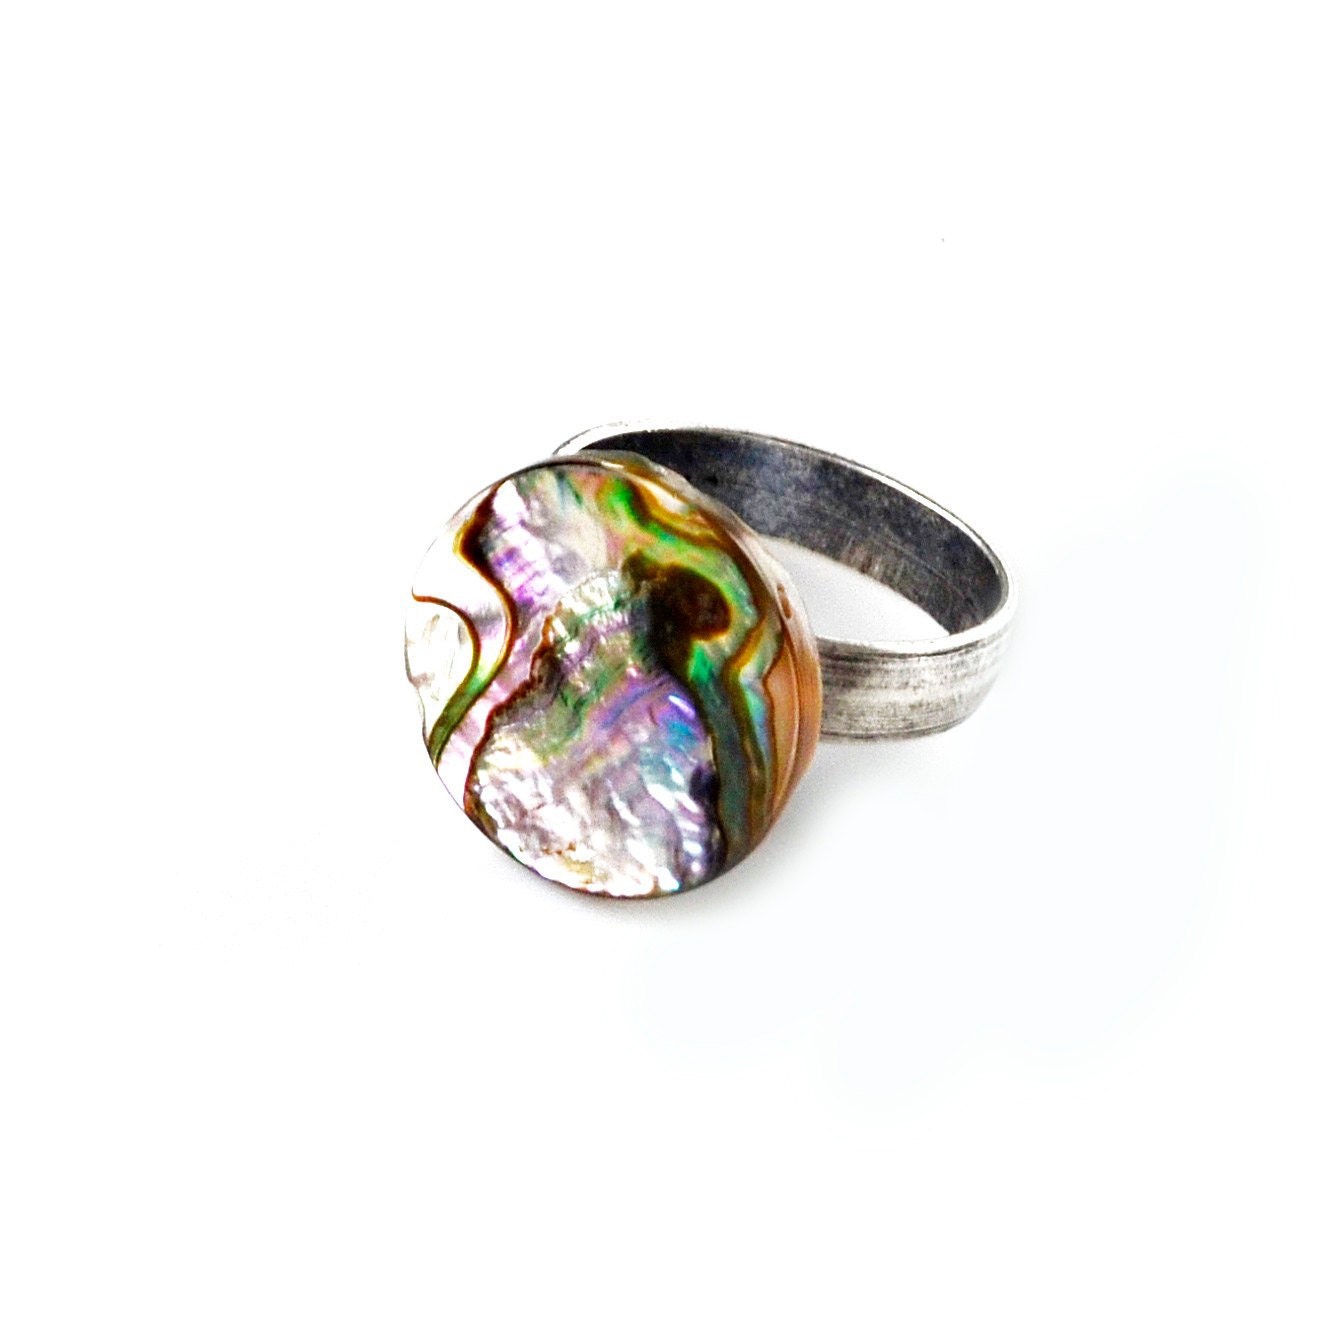 Abalone Adjustable Ring Jewelry Gifts for Women Handmade